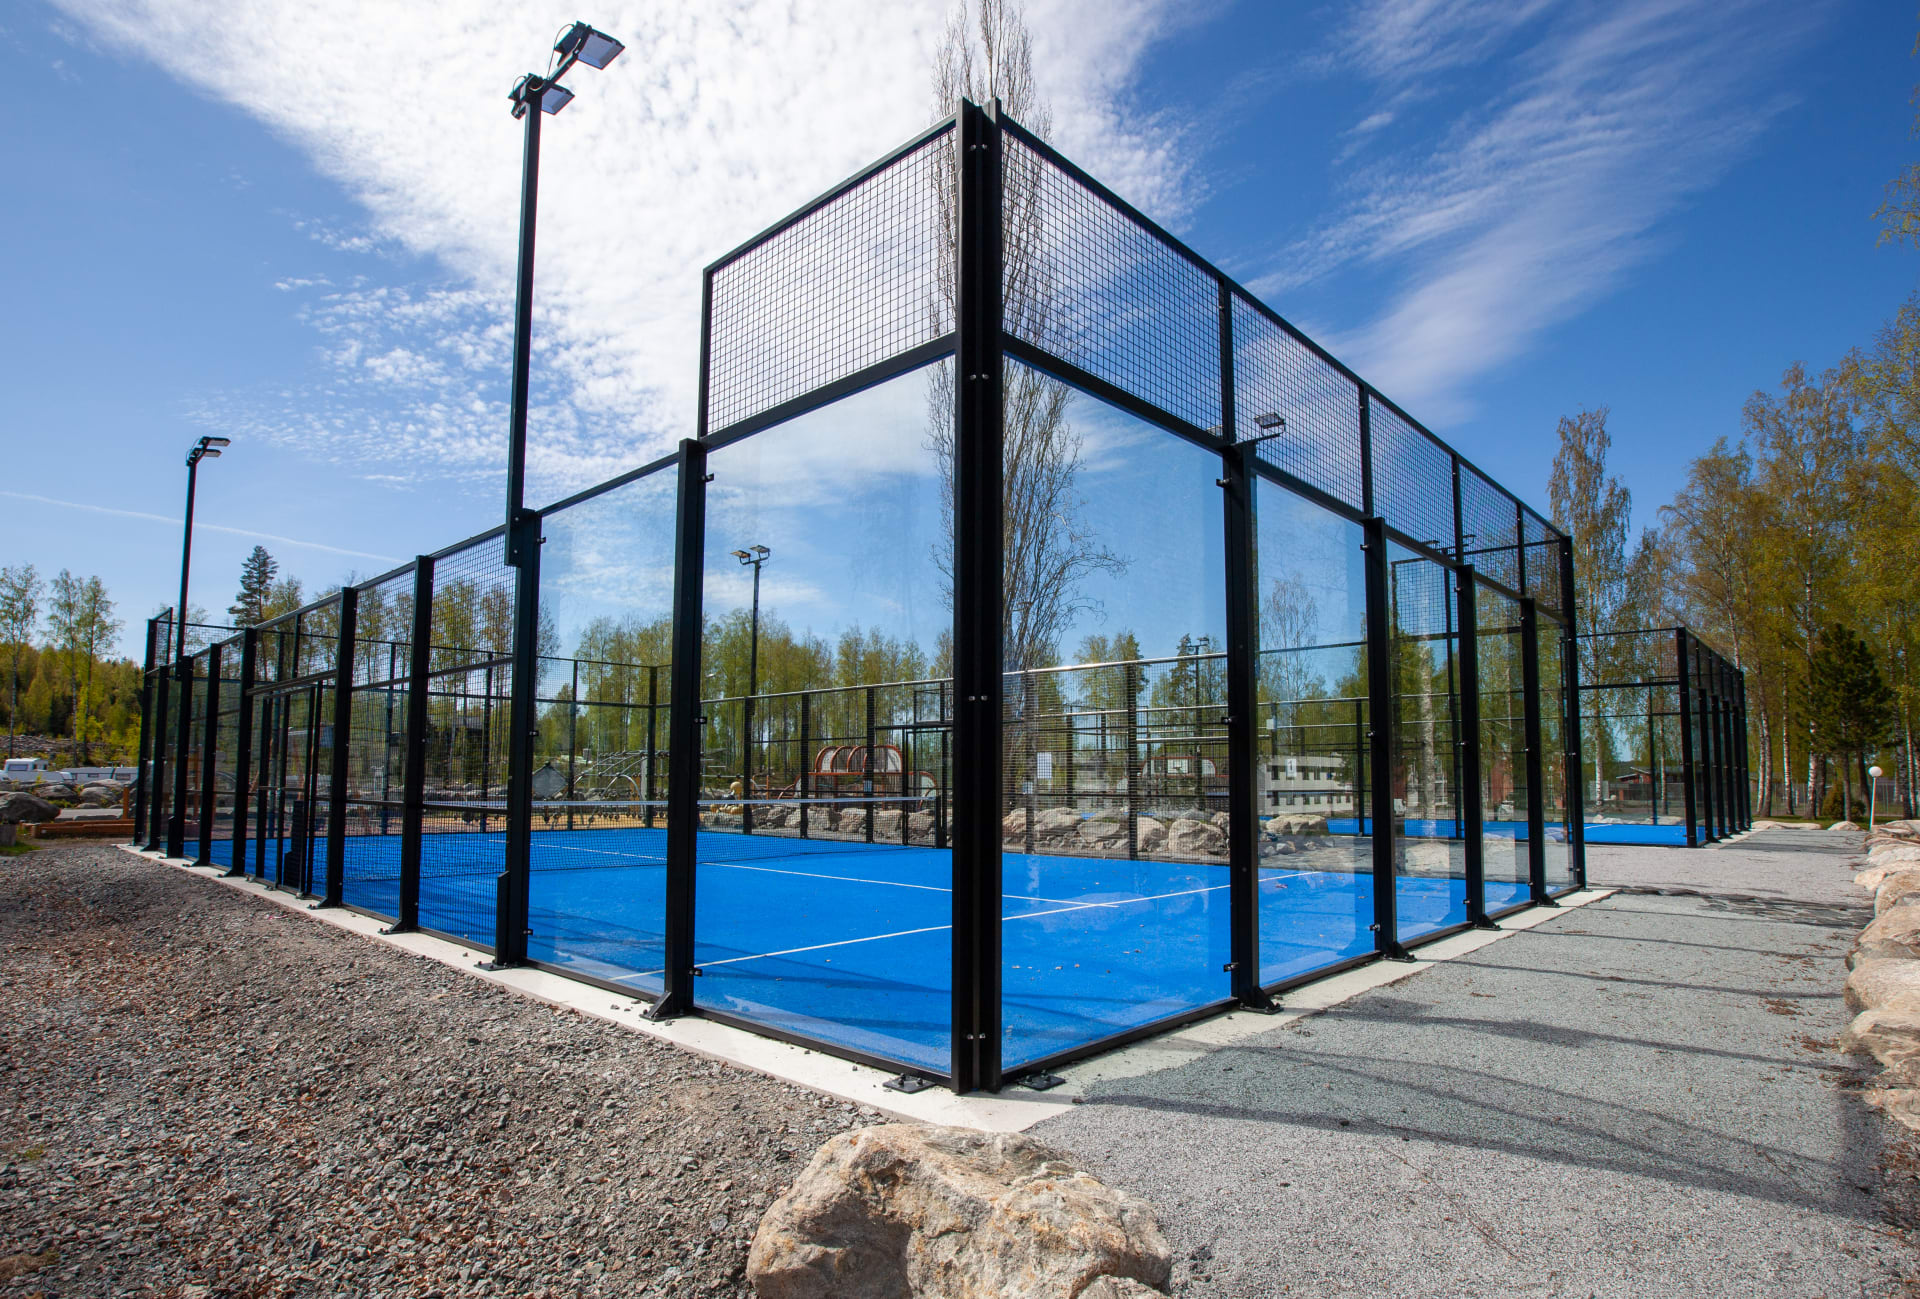 Padel is a racket game that combines the best parts of both tennis and squash in a brisk way. Padel is only available in the summer season.